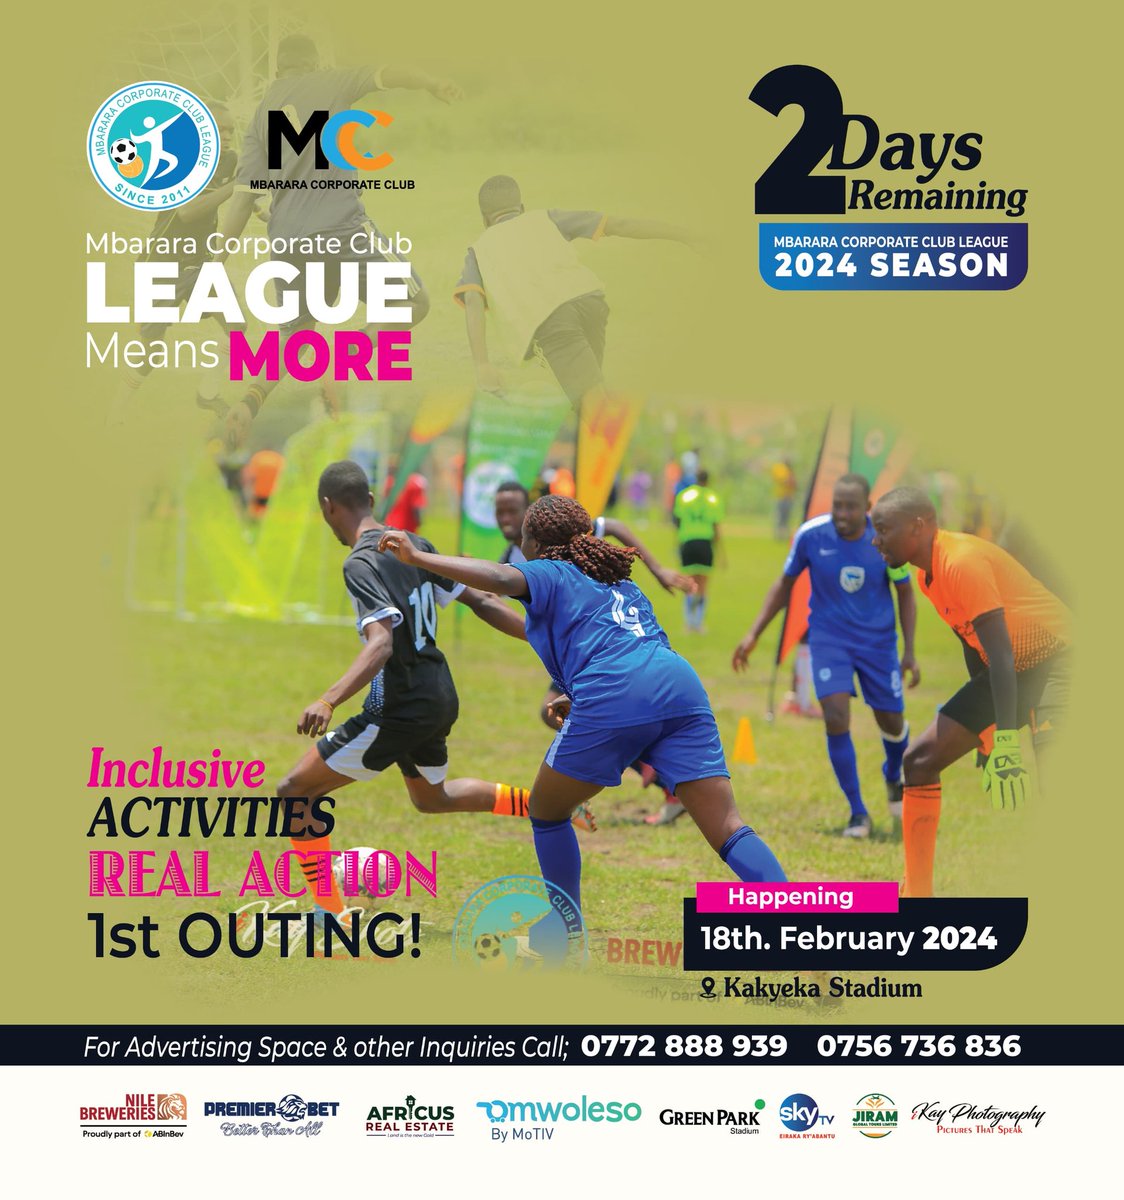 Come engage in various games on Sunday 
Let's burn those calories 
For MCC the Hashtags are
#NBLMCCSeason24 
#MCCOutings2024